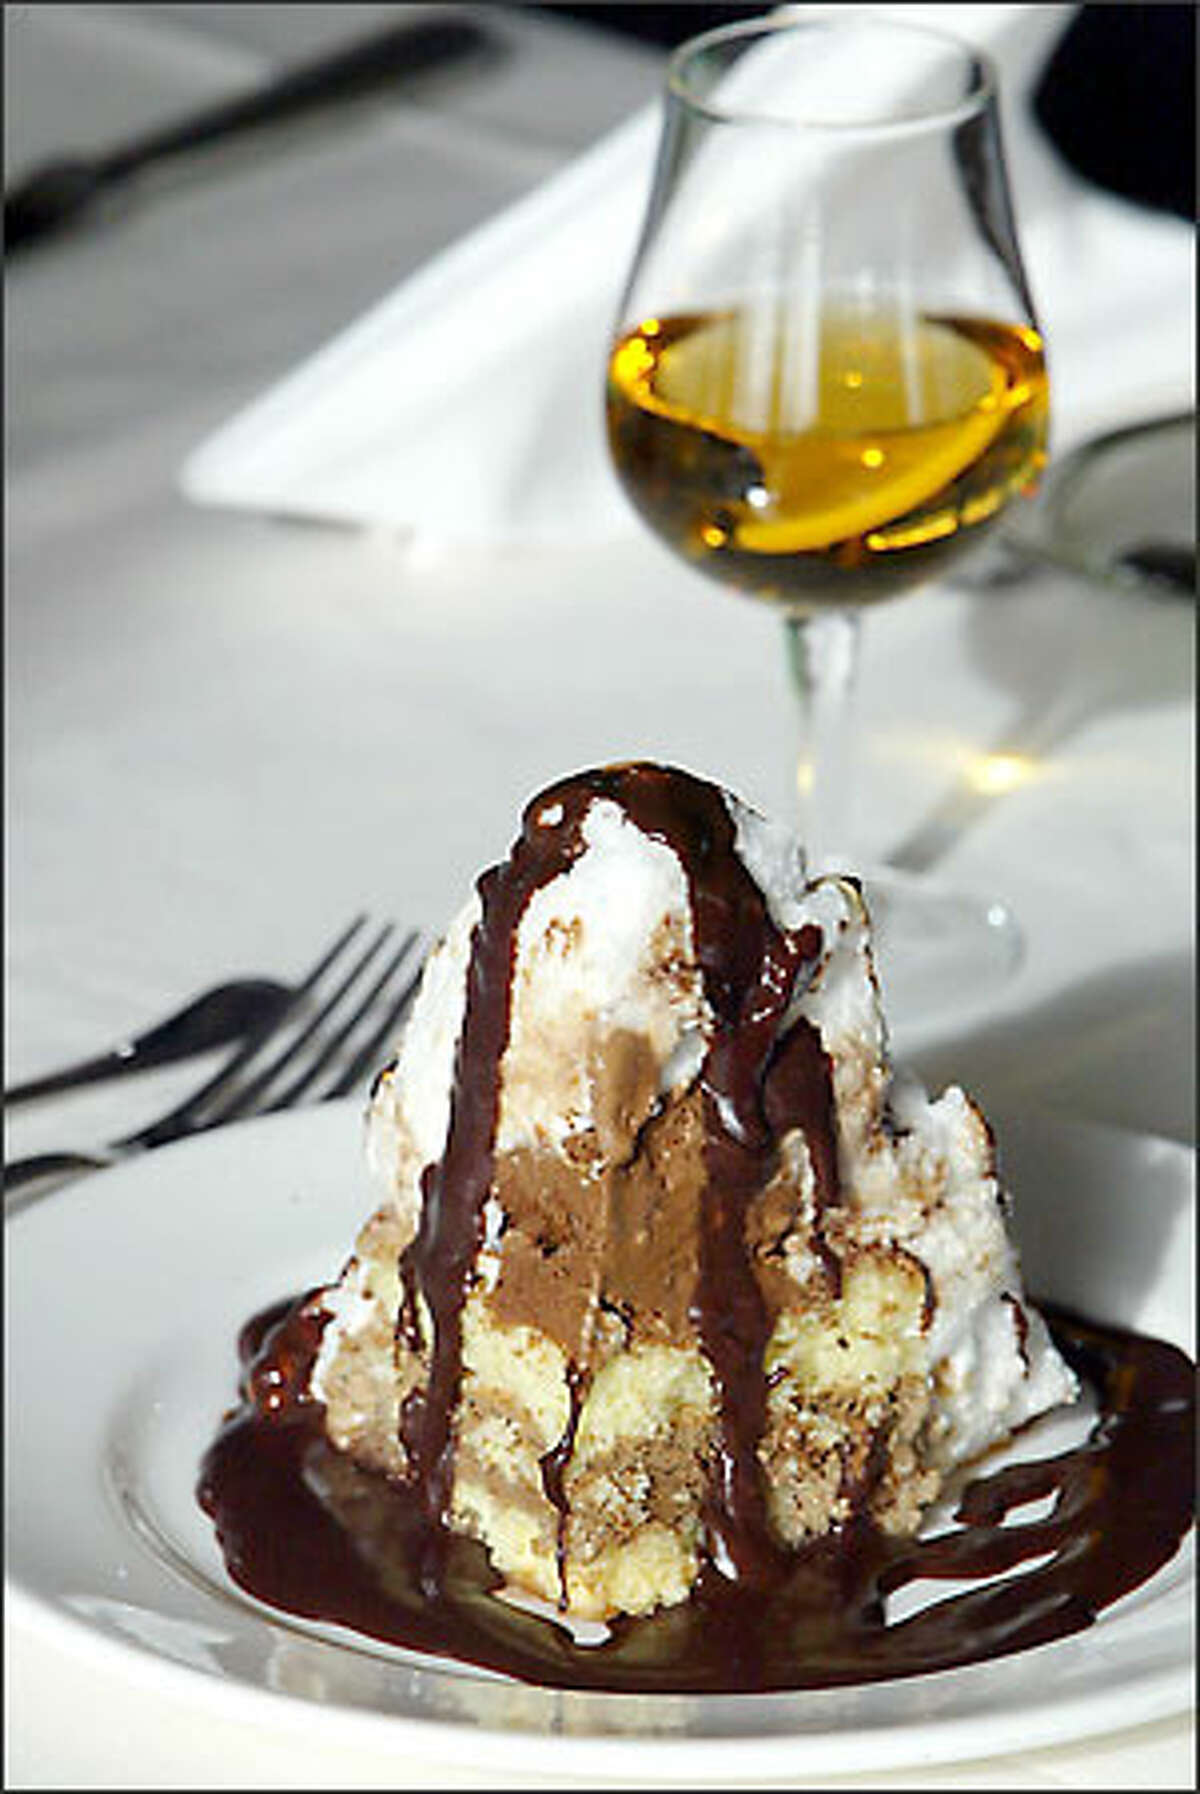 The dessert features liqueur-soaked cake topped with ice cream, meringue and a chocolate or strawberry sauce.